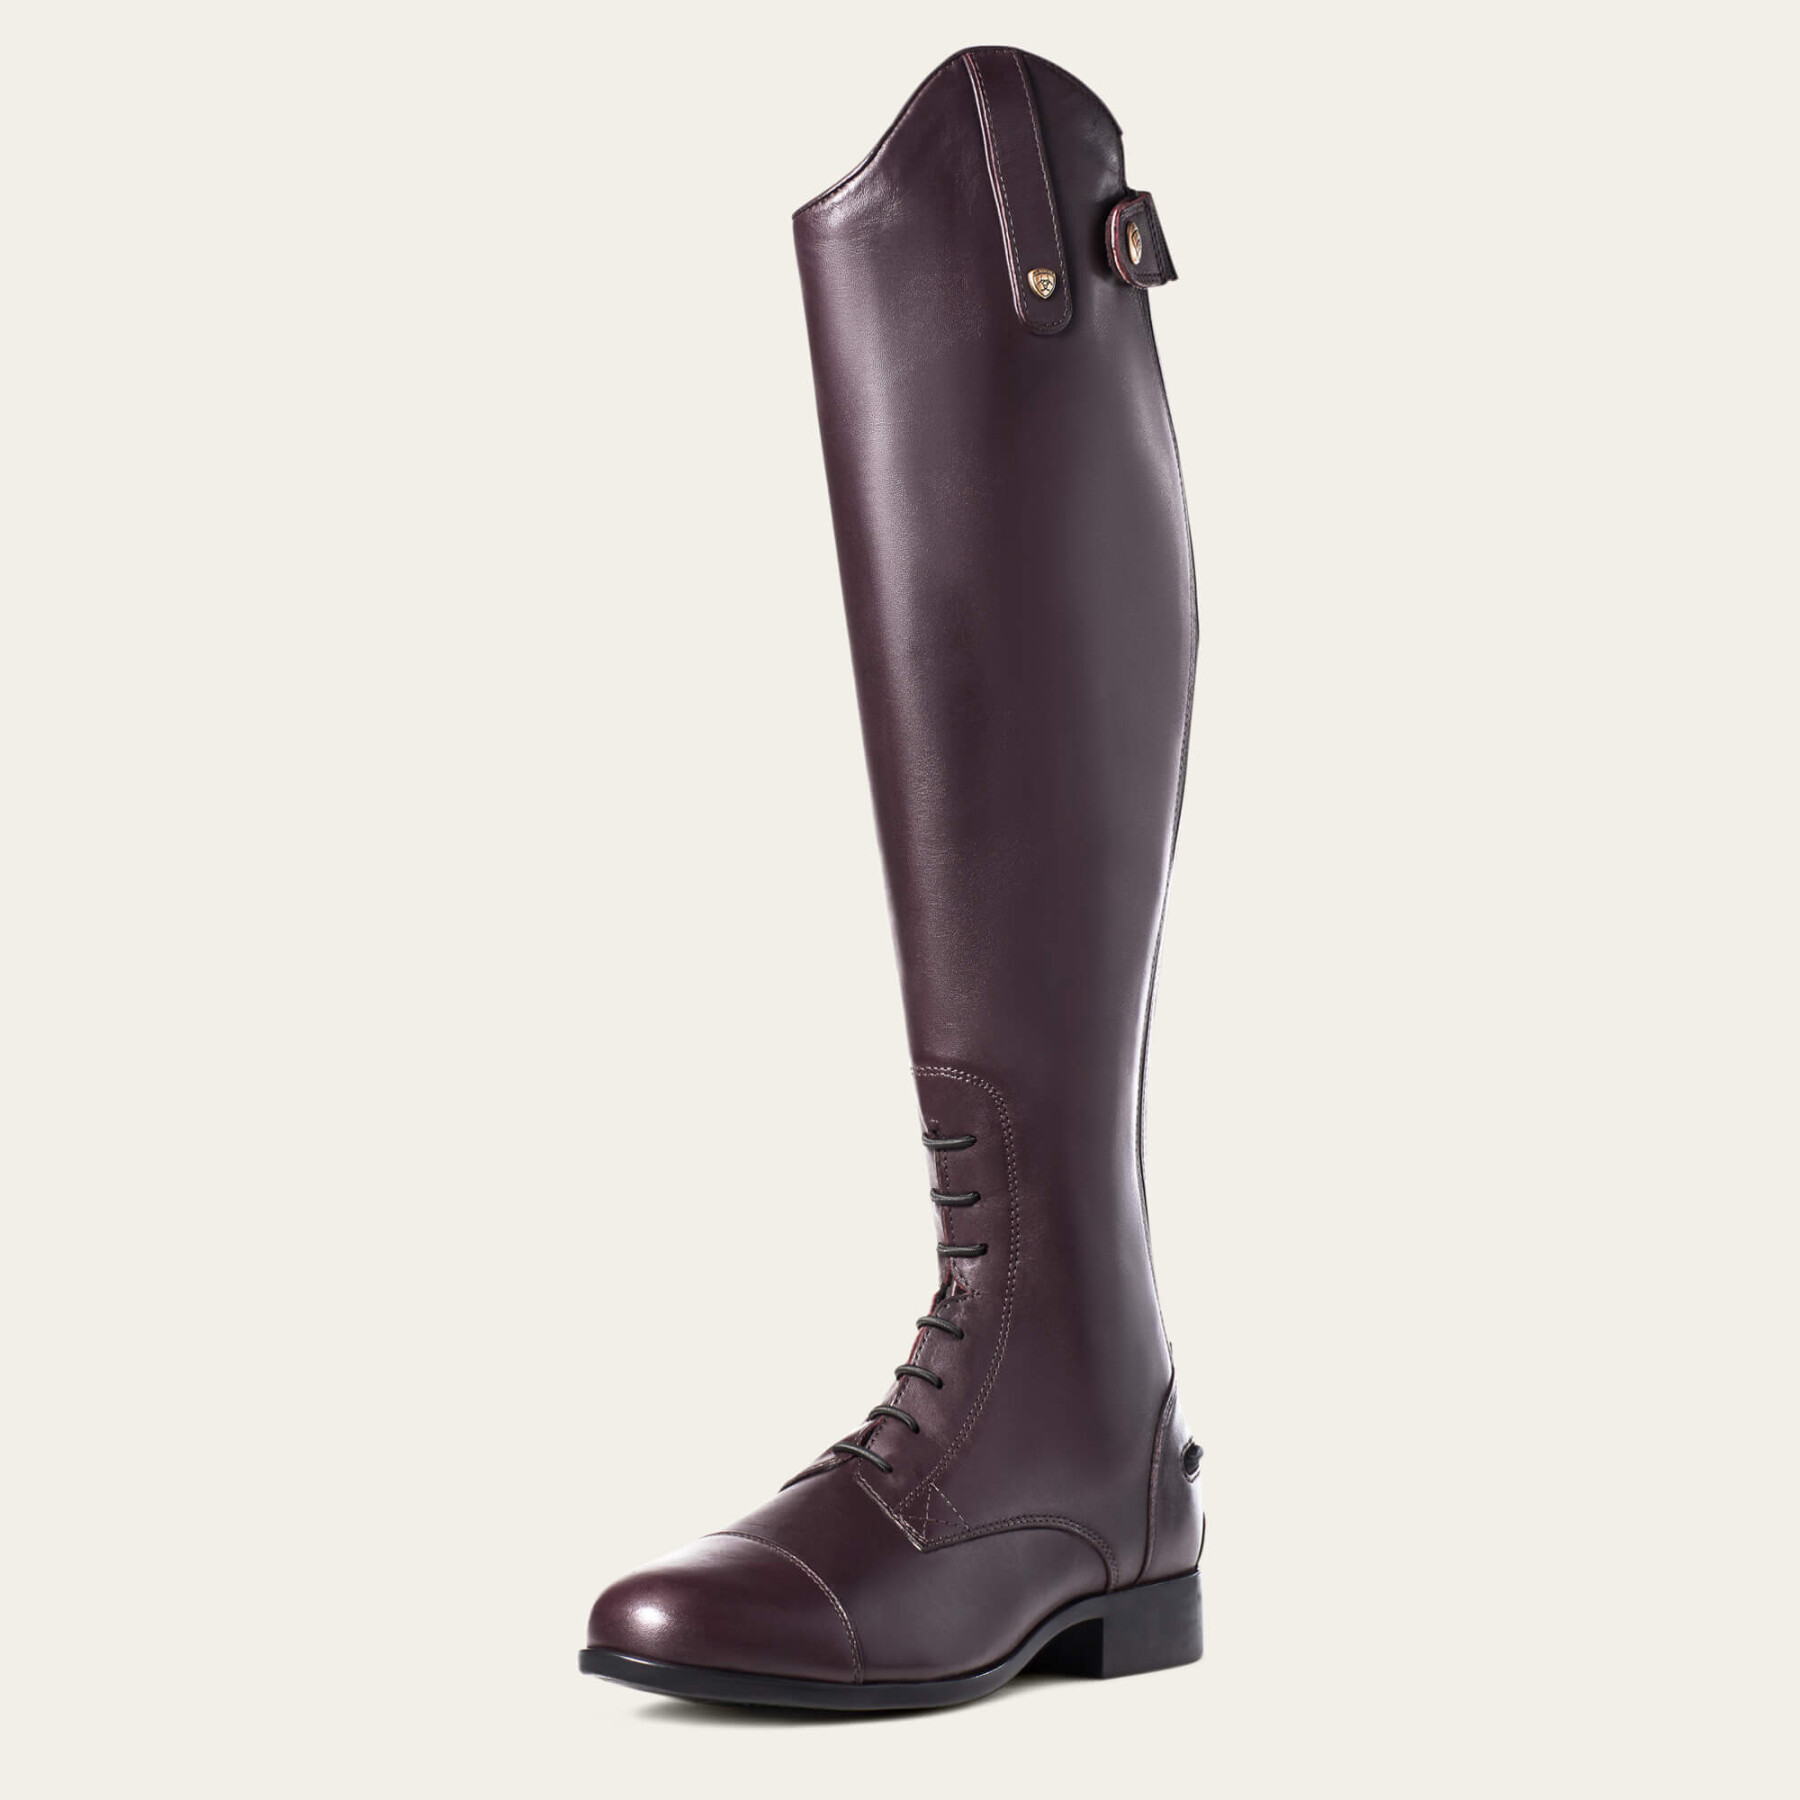 Women's riding boots Ariat Heritage Contour II Field